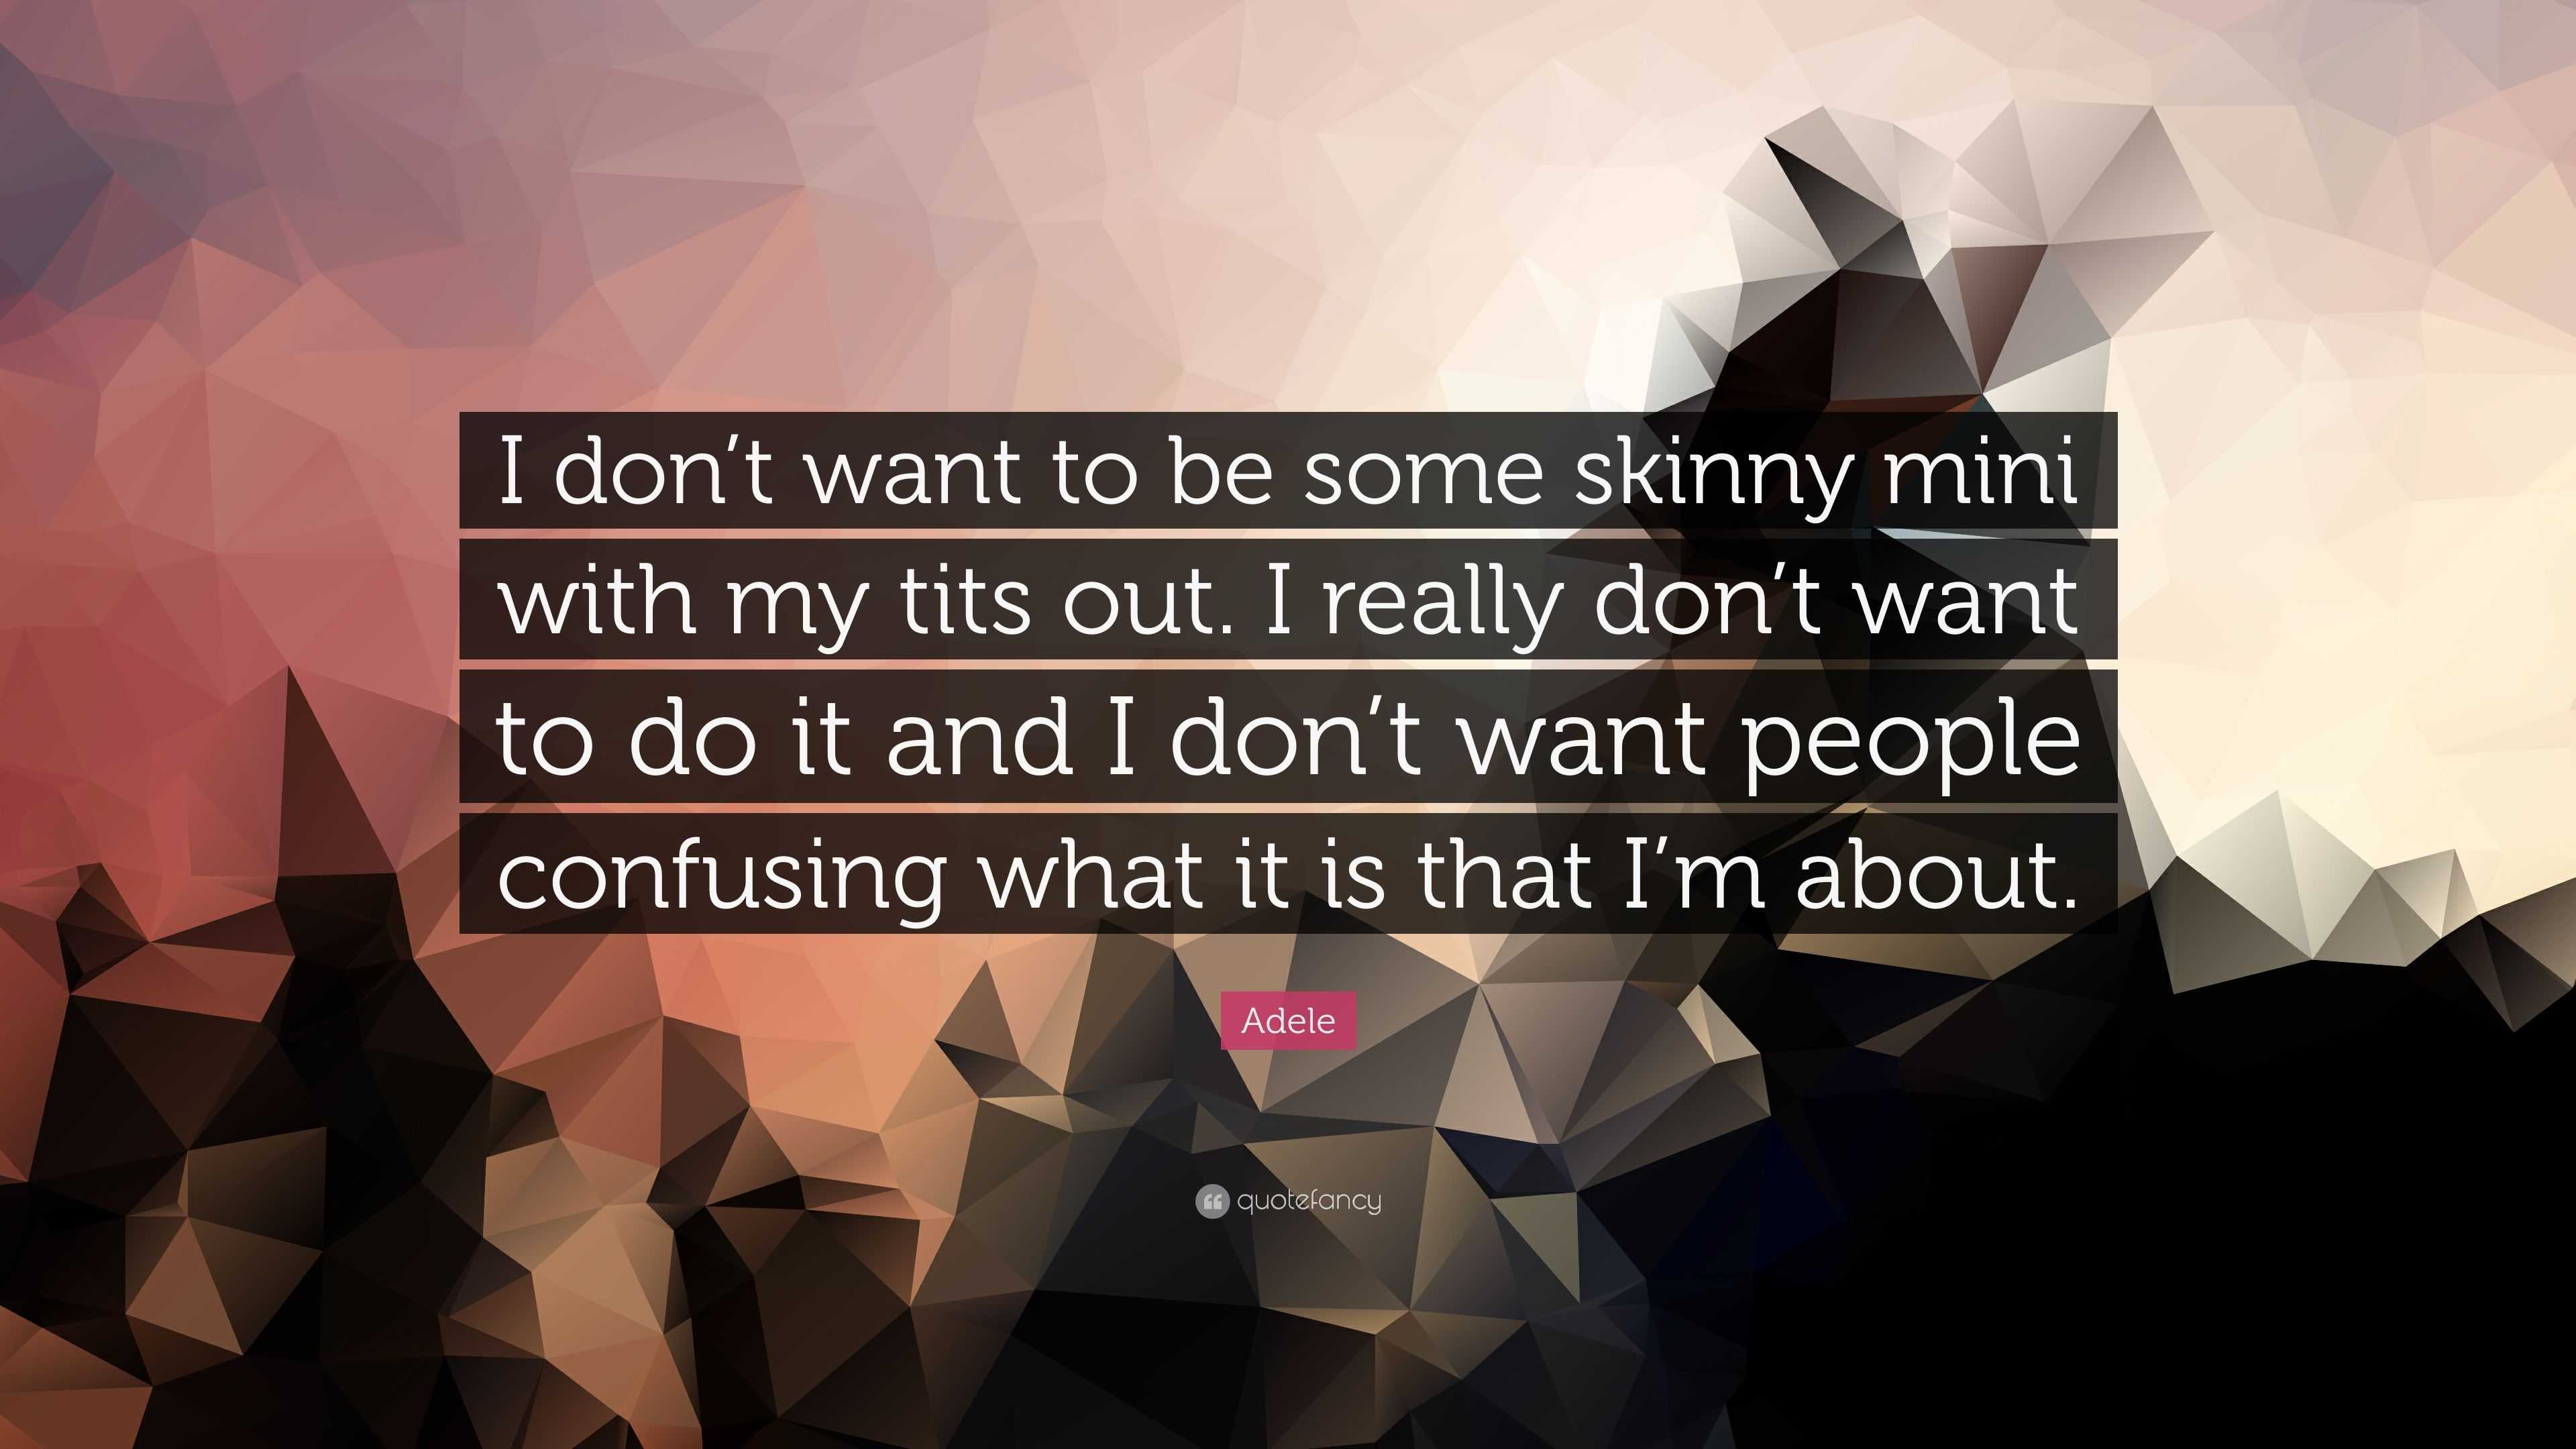 https://quotefancy.com/media/wallpaper/3840x2160/5025950-Adele-Quote-I-don-t-want-to-be-some-skinny-mini-with-my-tits-out-I.jpg